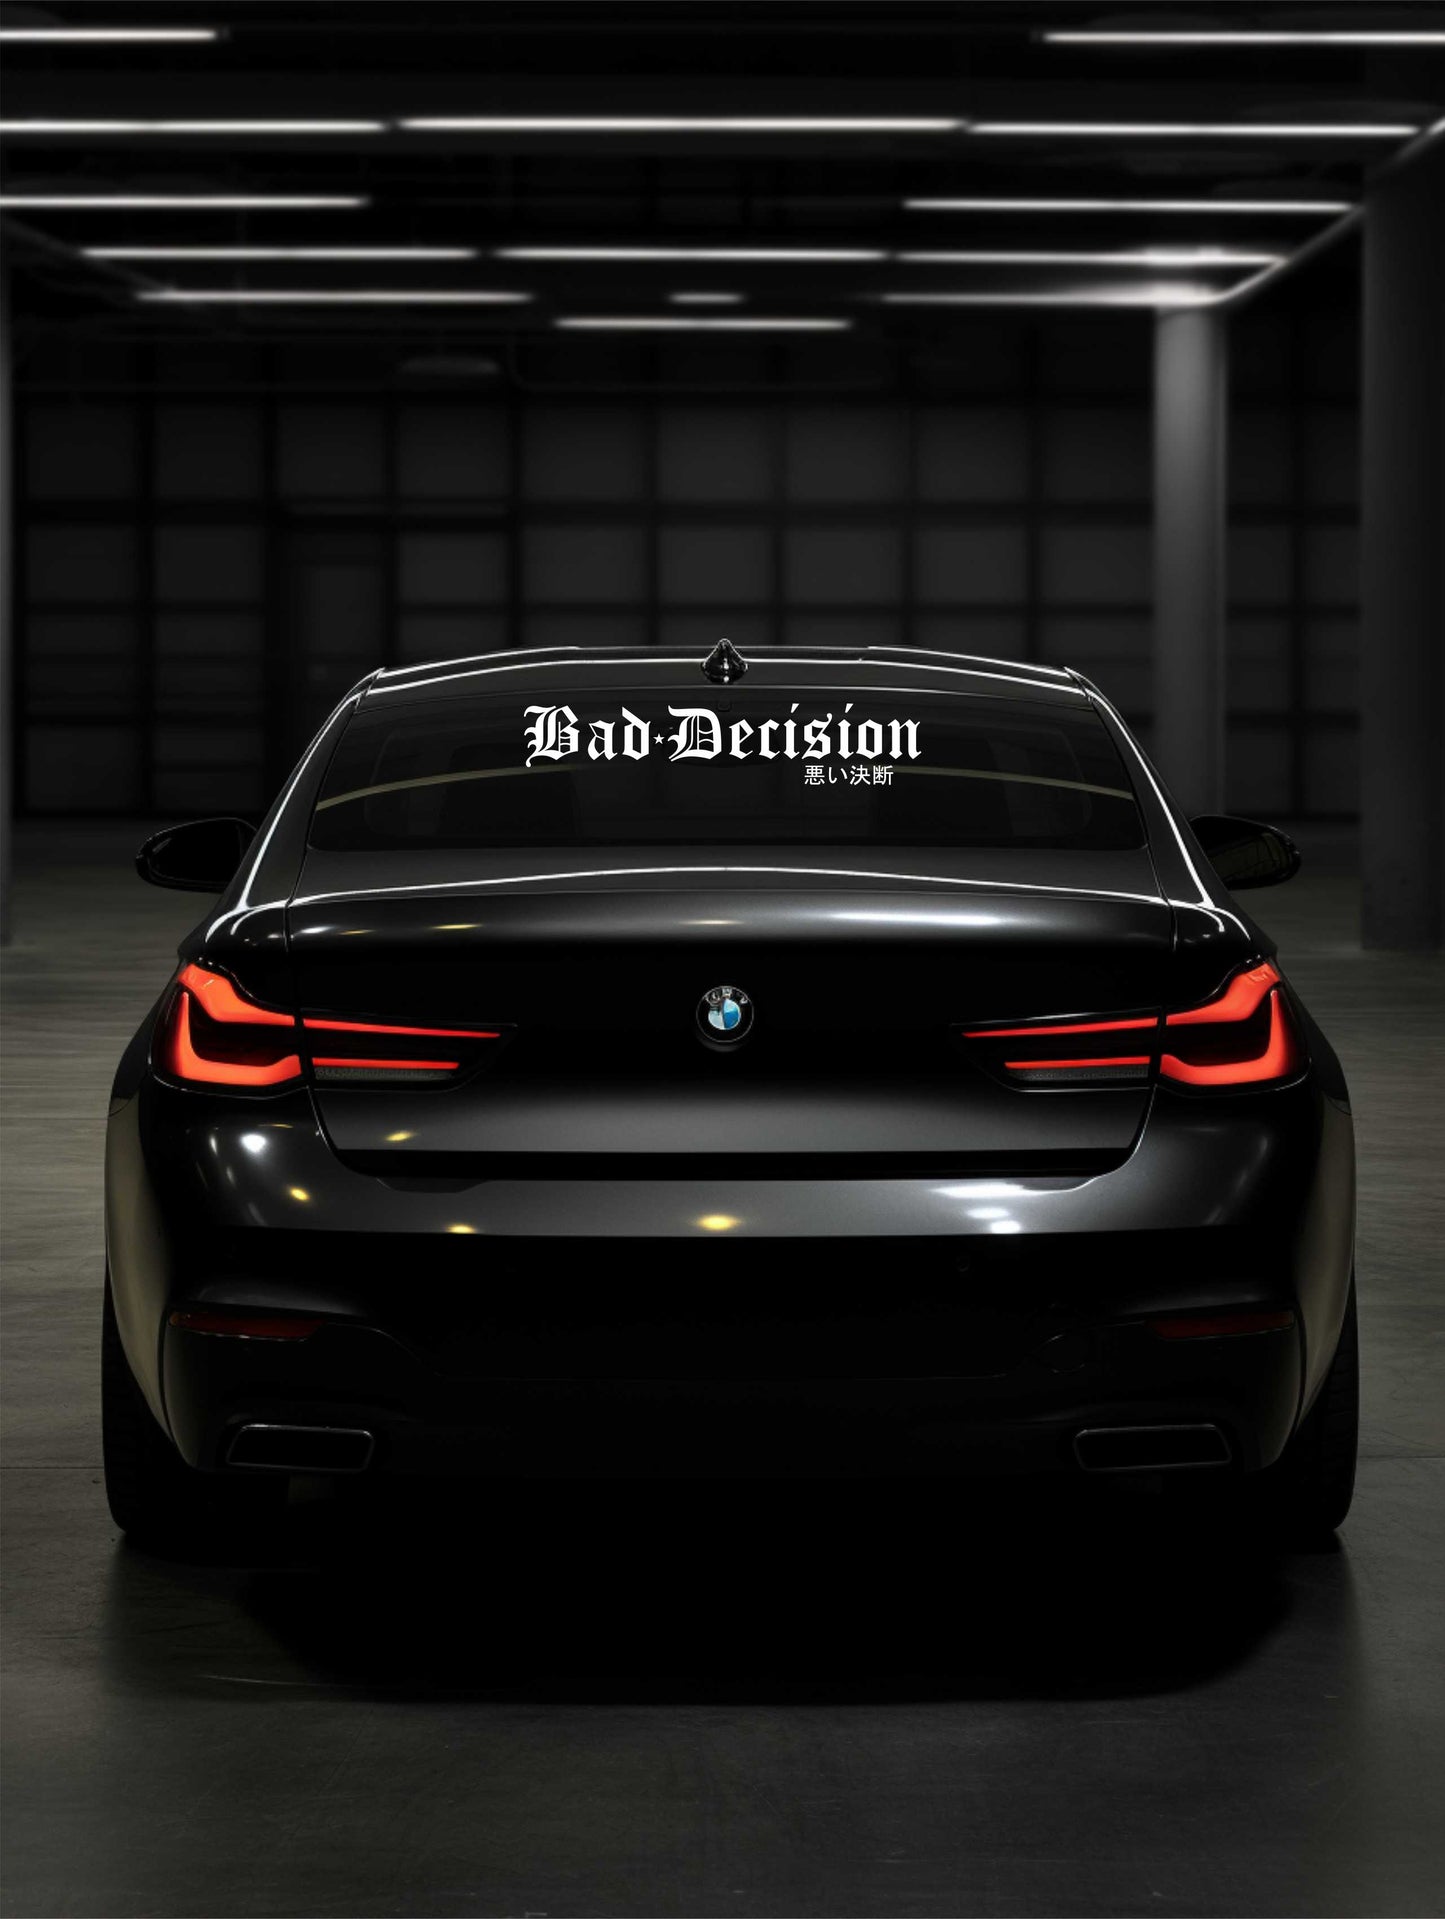 ''Bad Decision'' - Plotted Vinyl Banner Decal